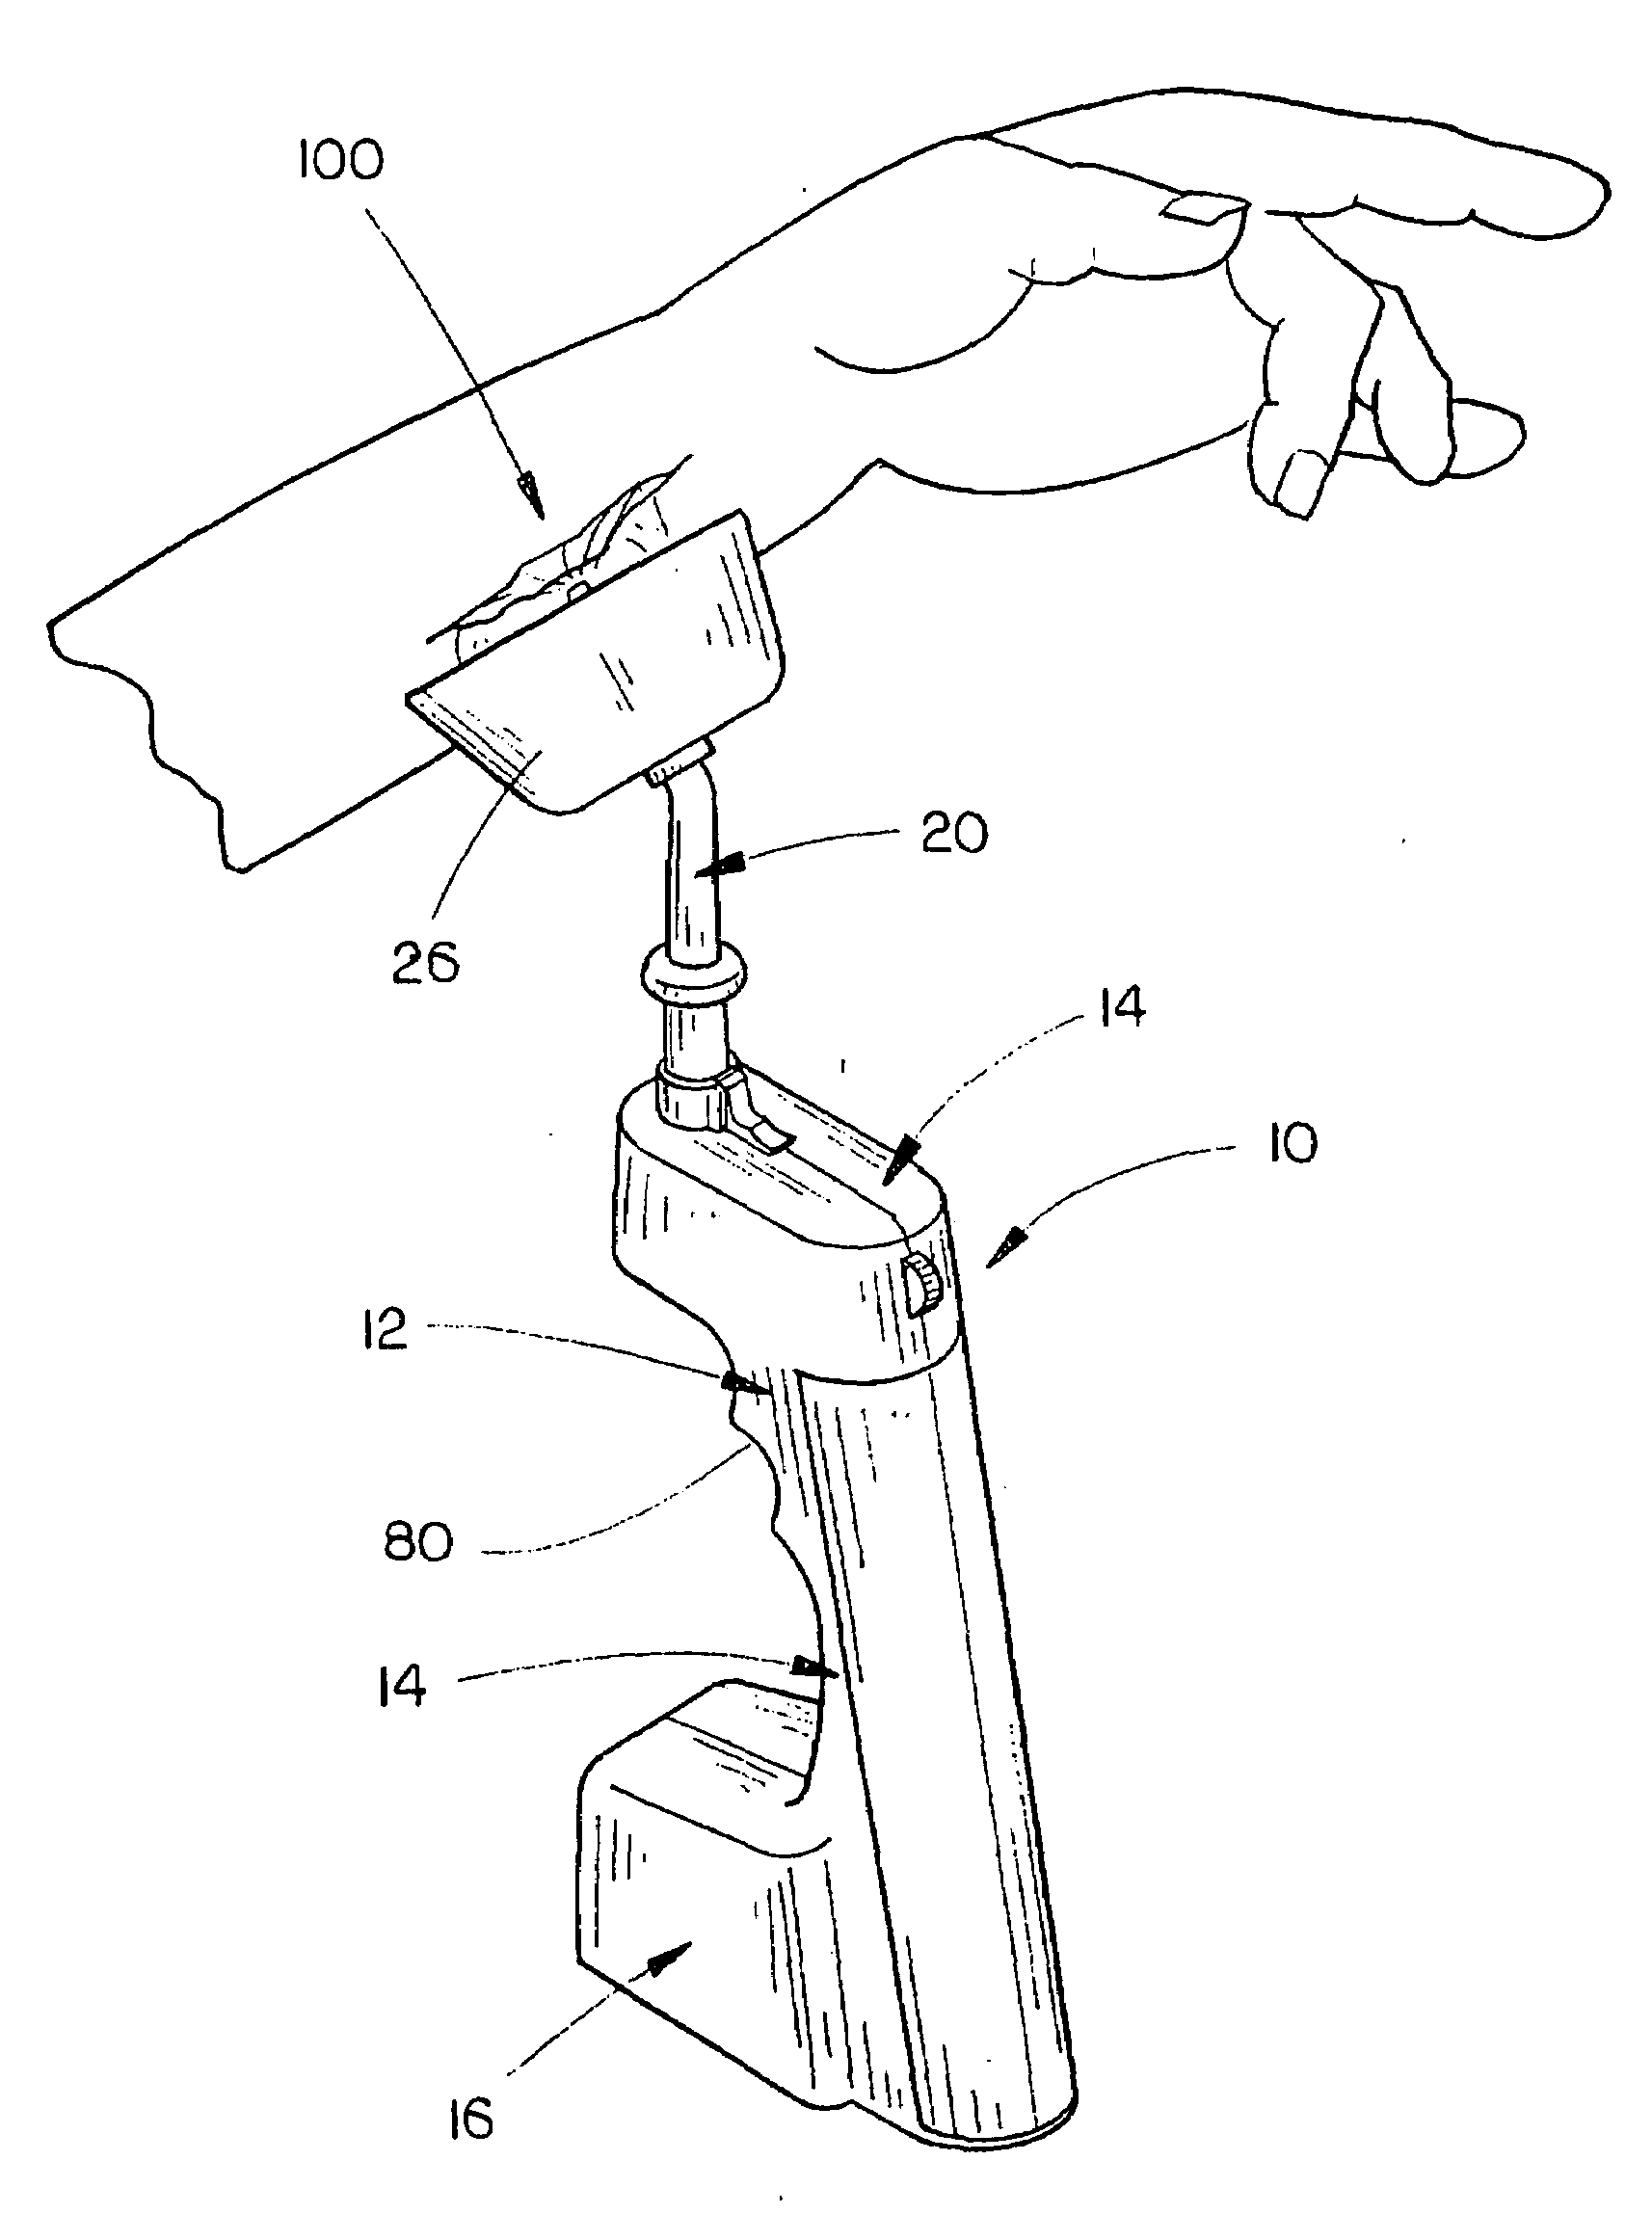 Portable debridement and irrigation device